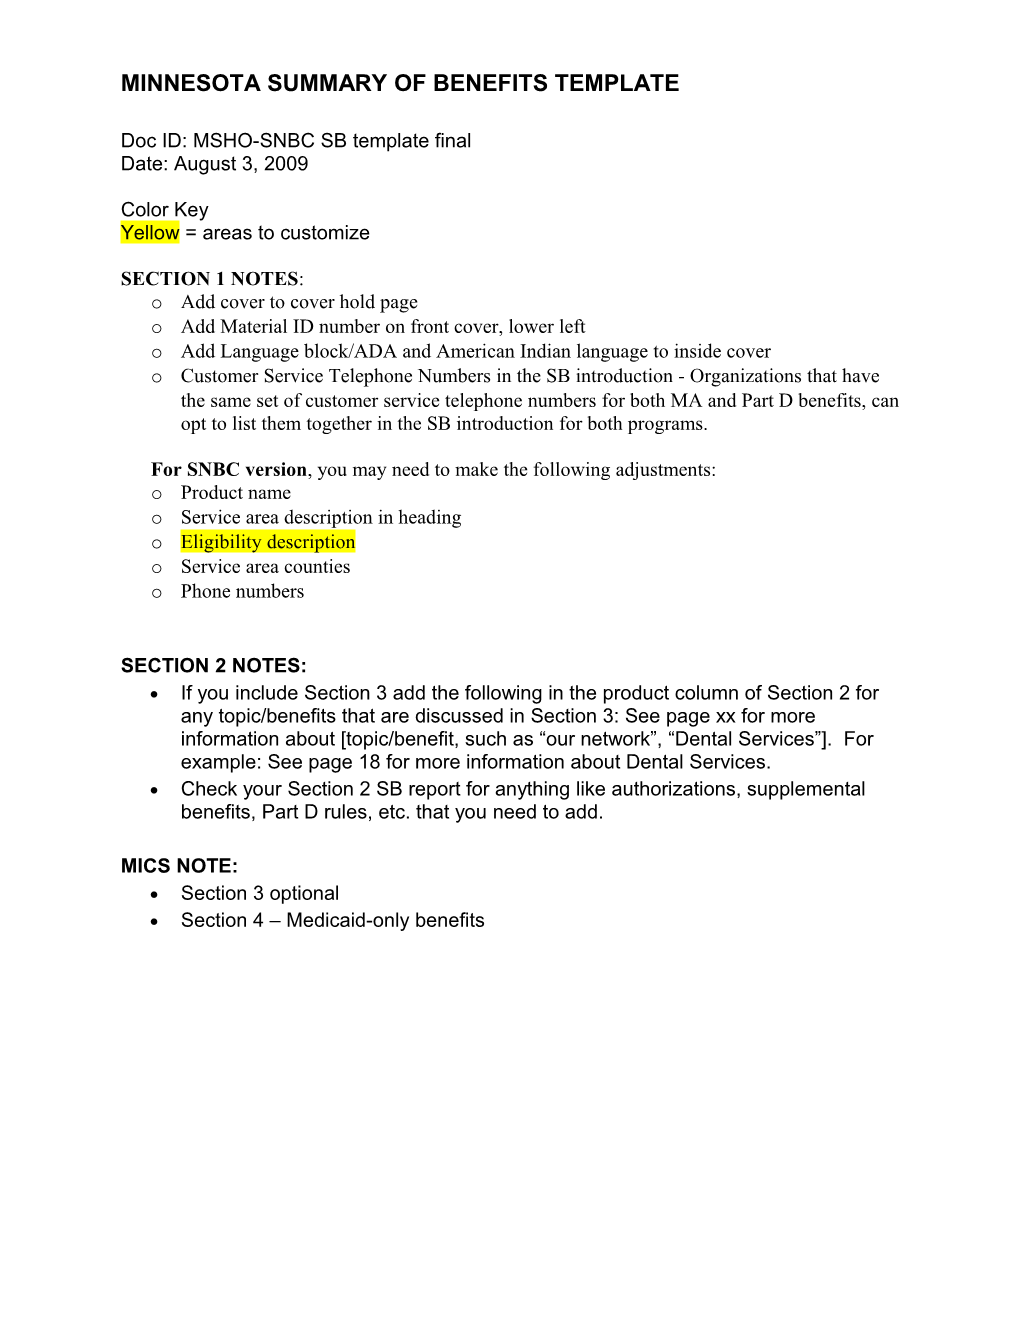 Doc ID: MSHO SB Section 2 Template Draft A